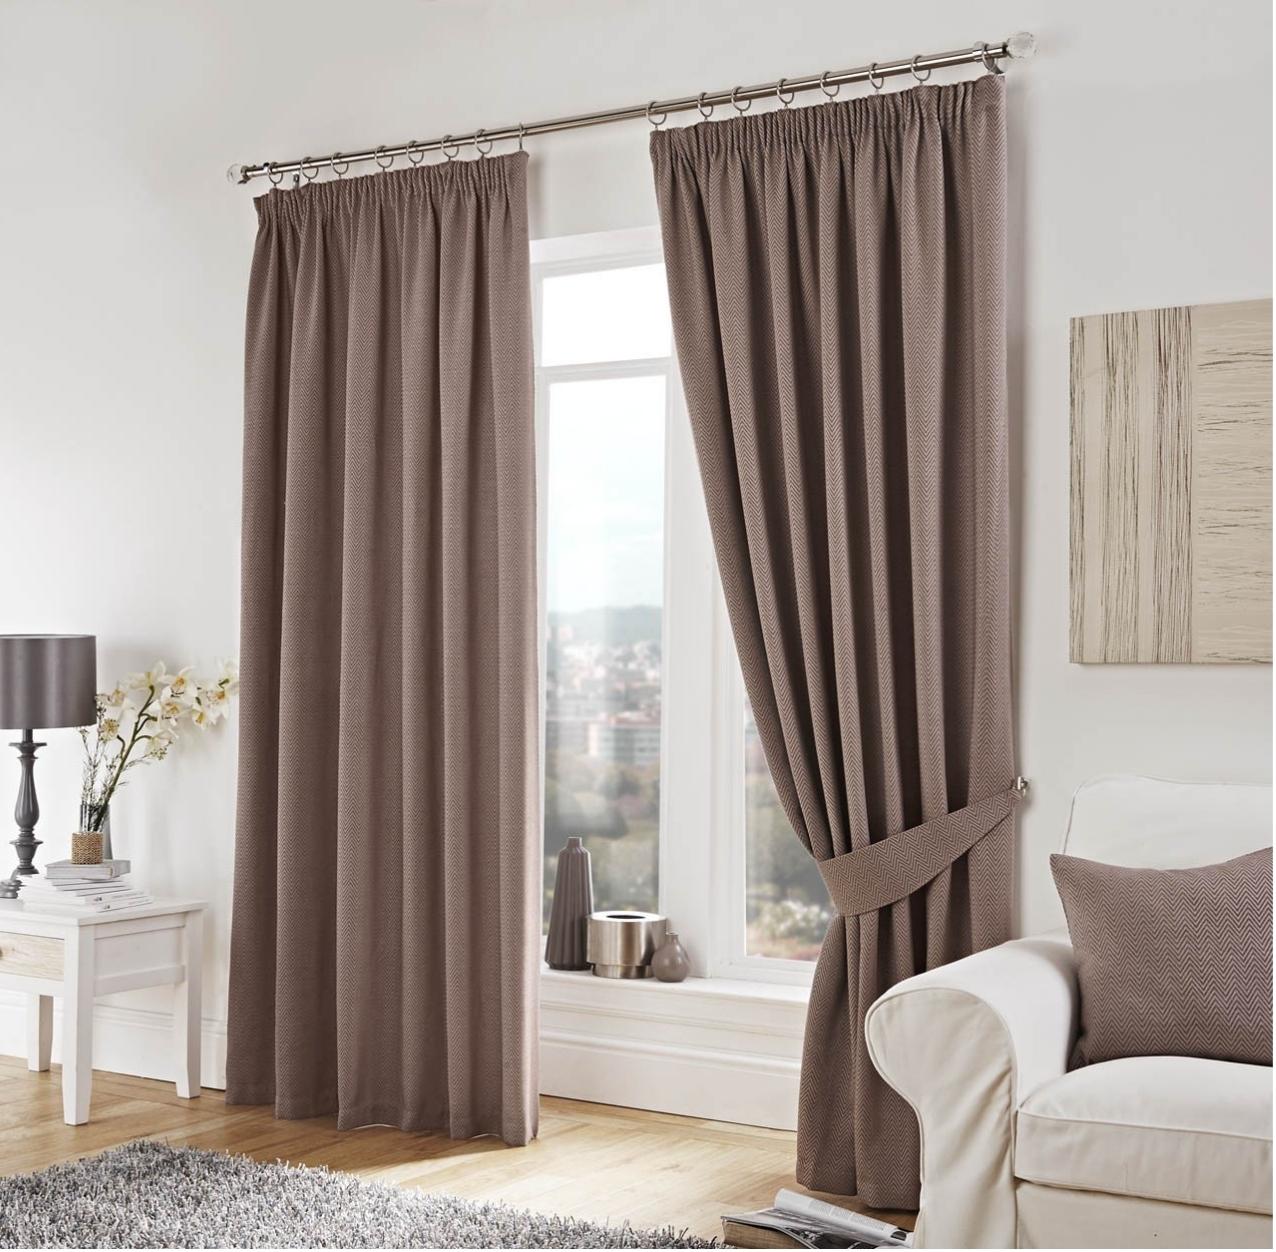 CURTAINS AND BLINDS IN DUBAI